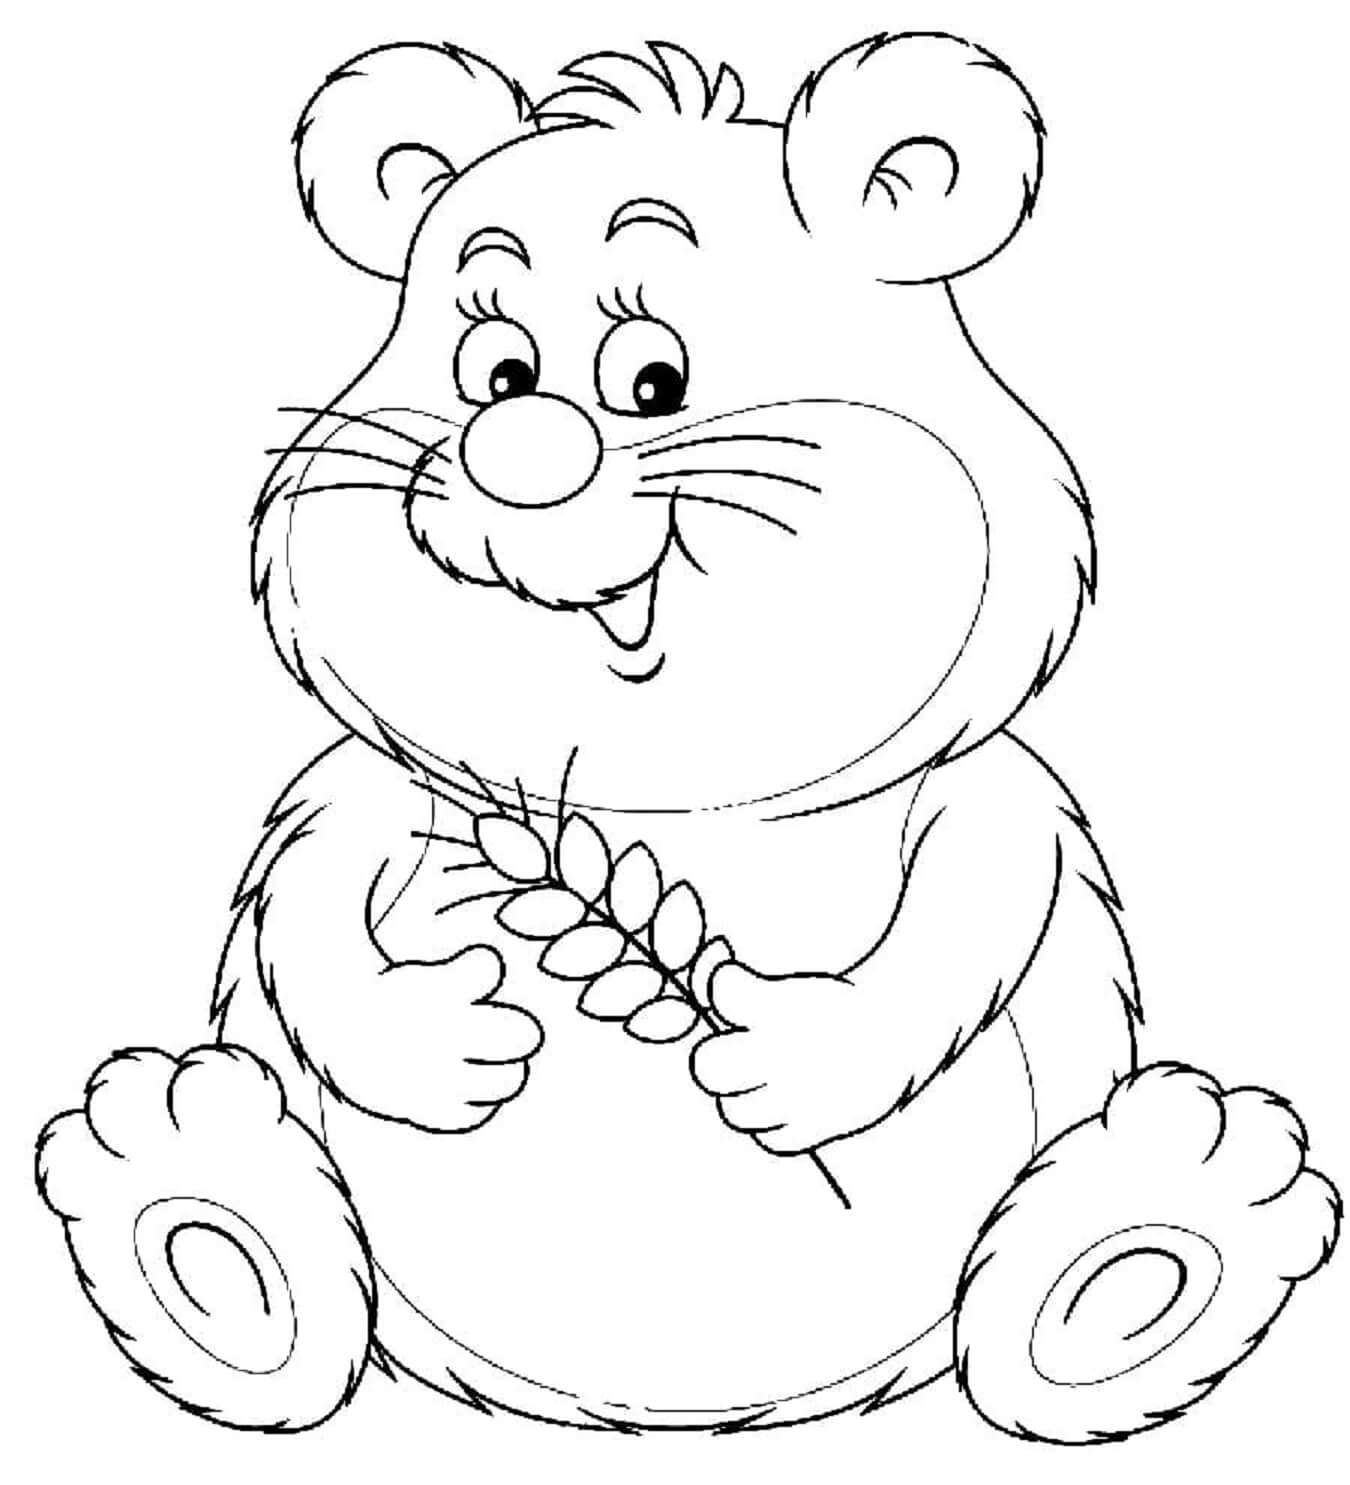 Hamster holding a tree branch coloring page